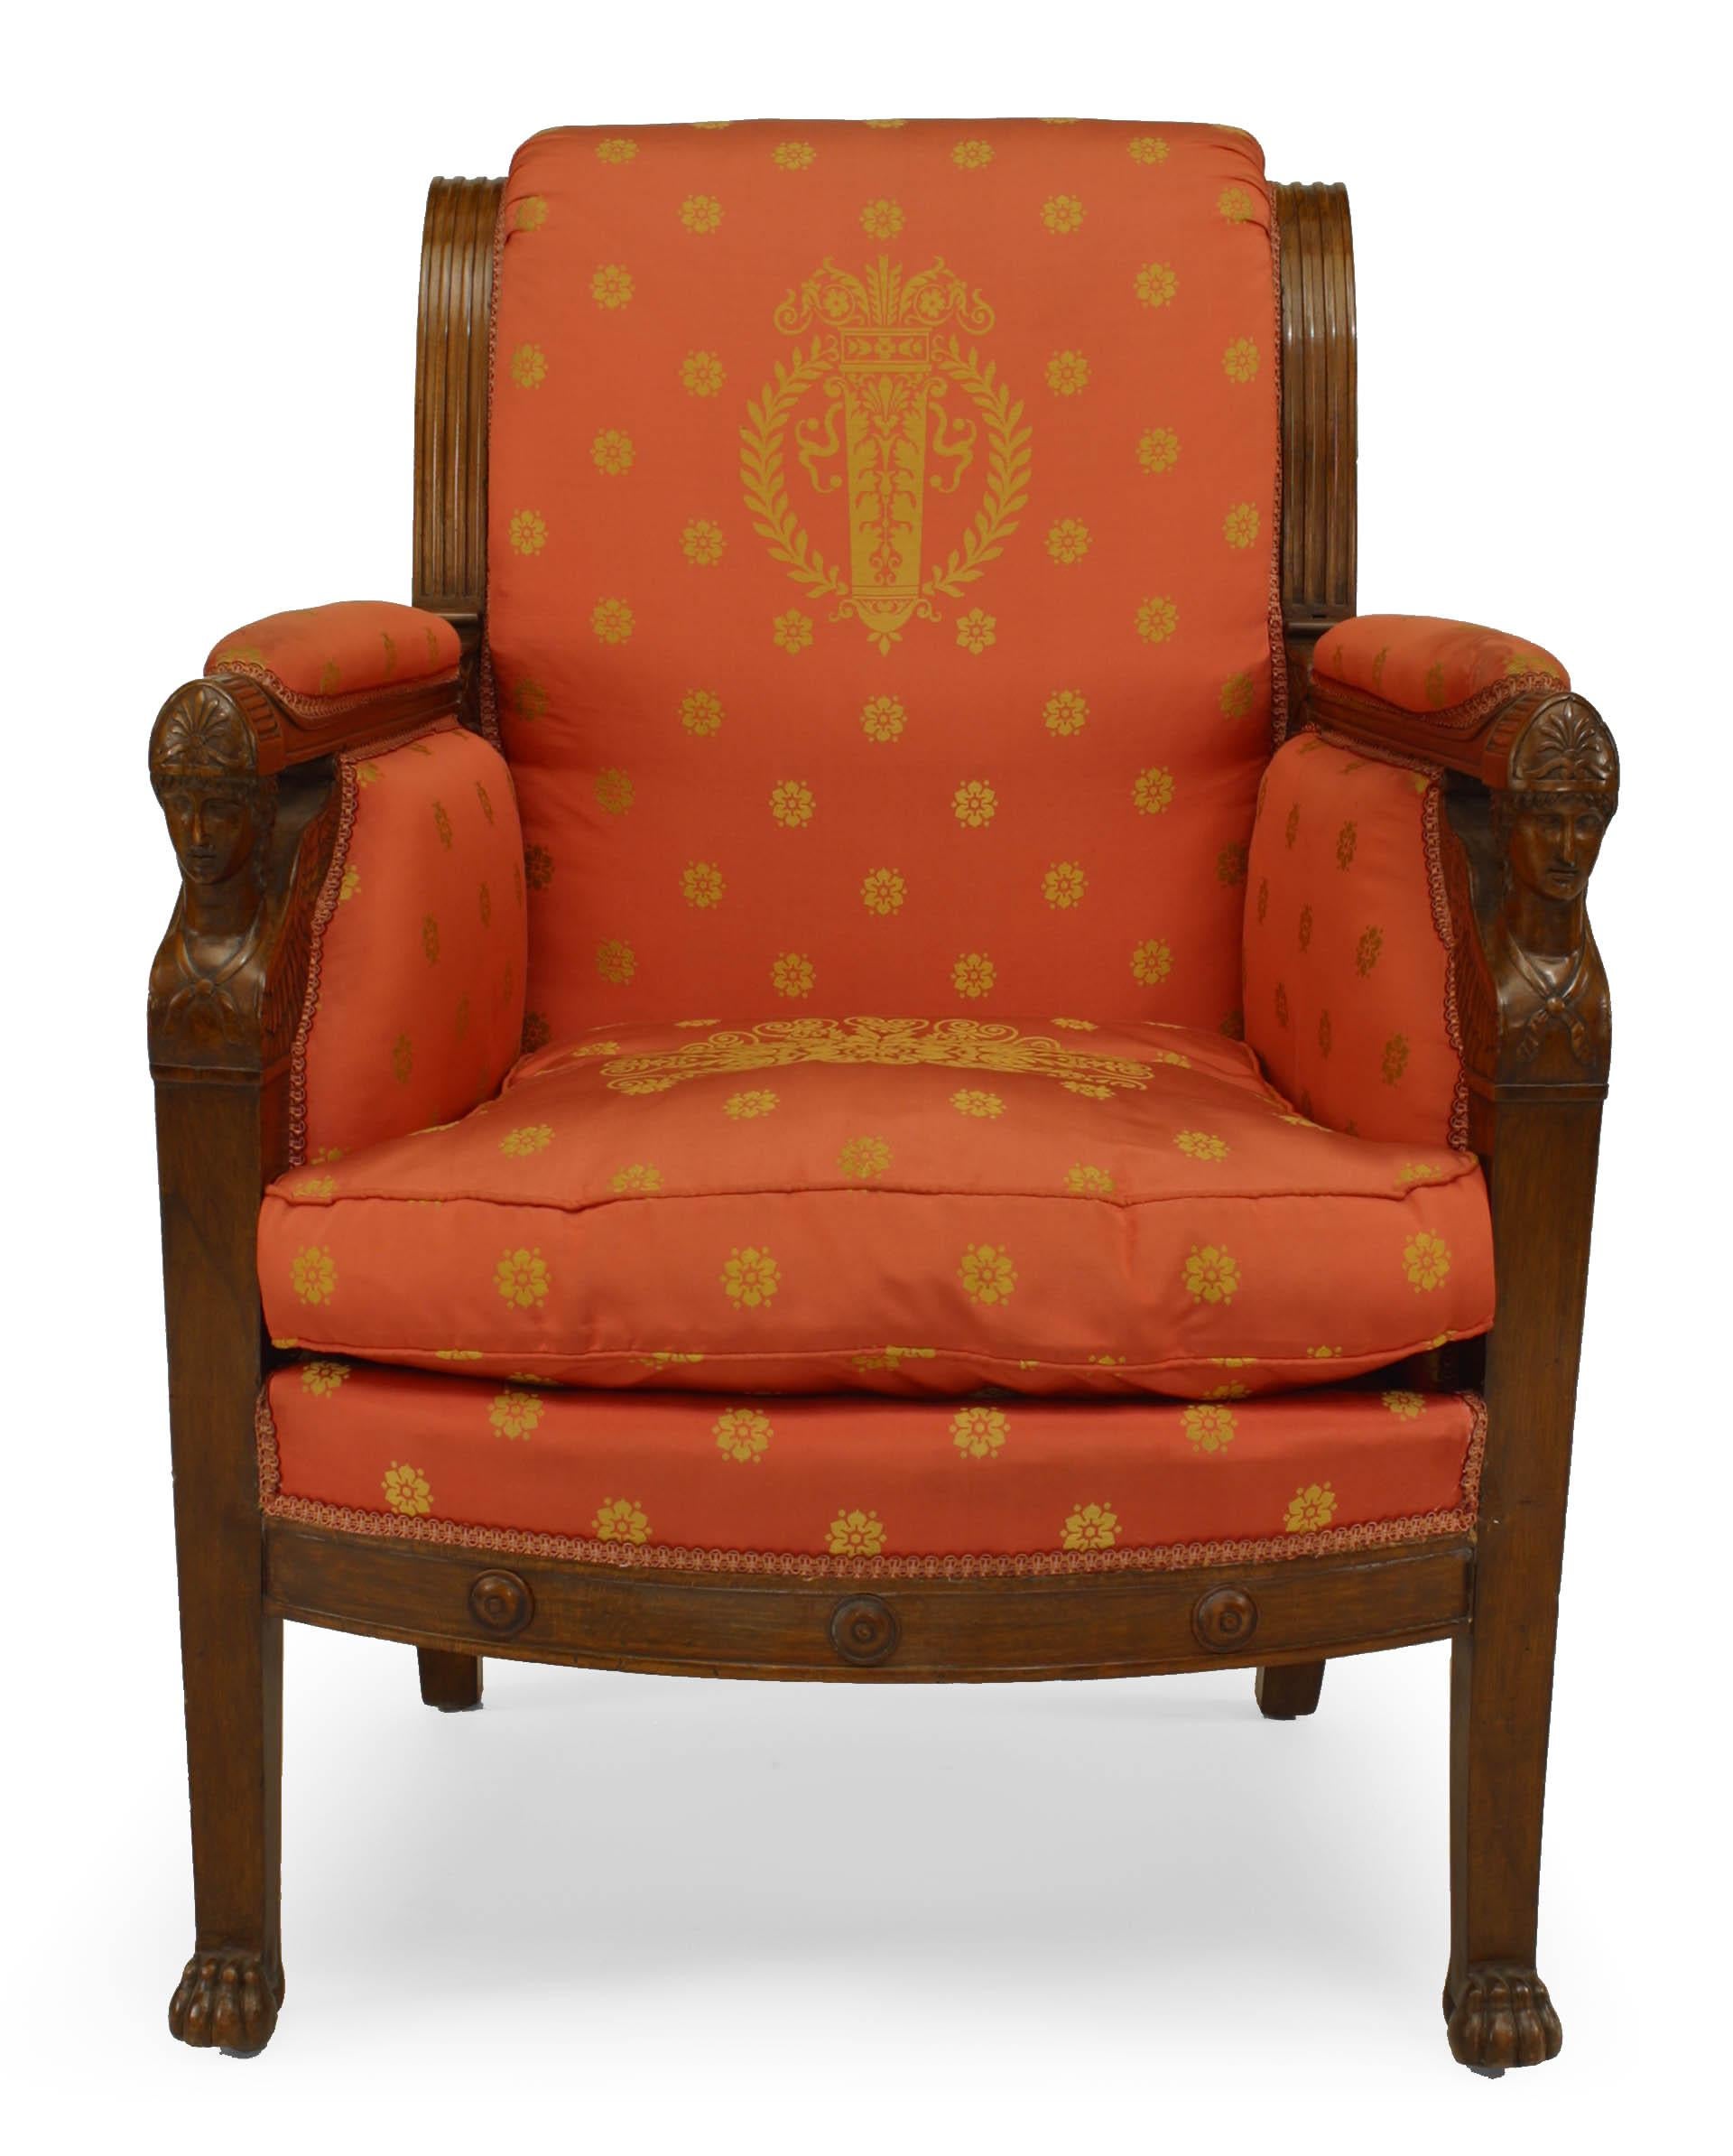 Pair of French Empire mahogany bergère (armchairs) upholstered in red silk with scrolled back above winged caryatid arm uprights & a loose seat cushion, (early 19th century).